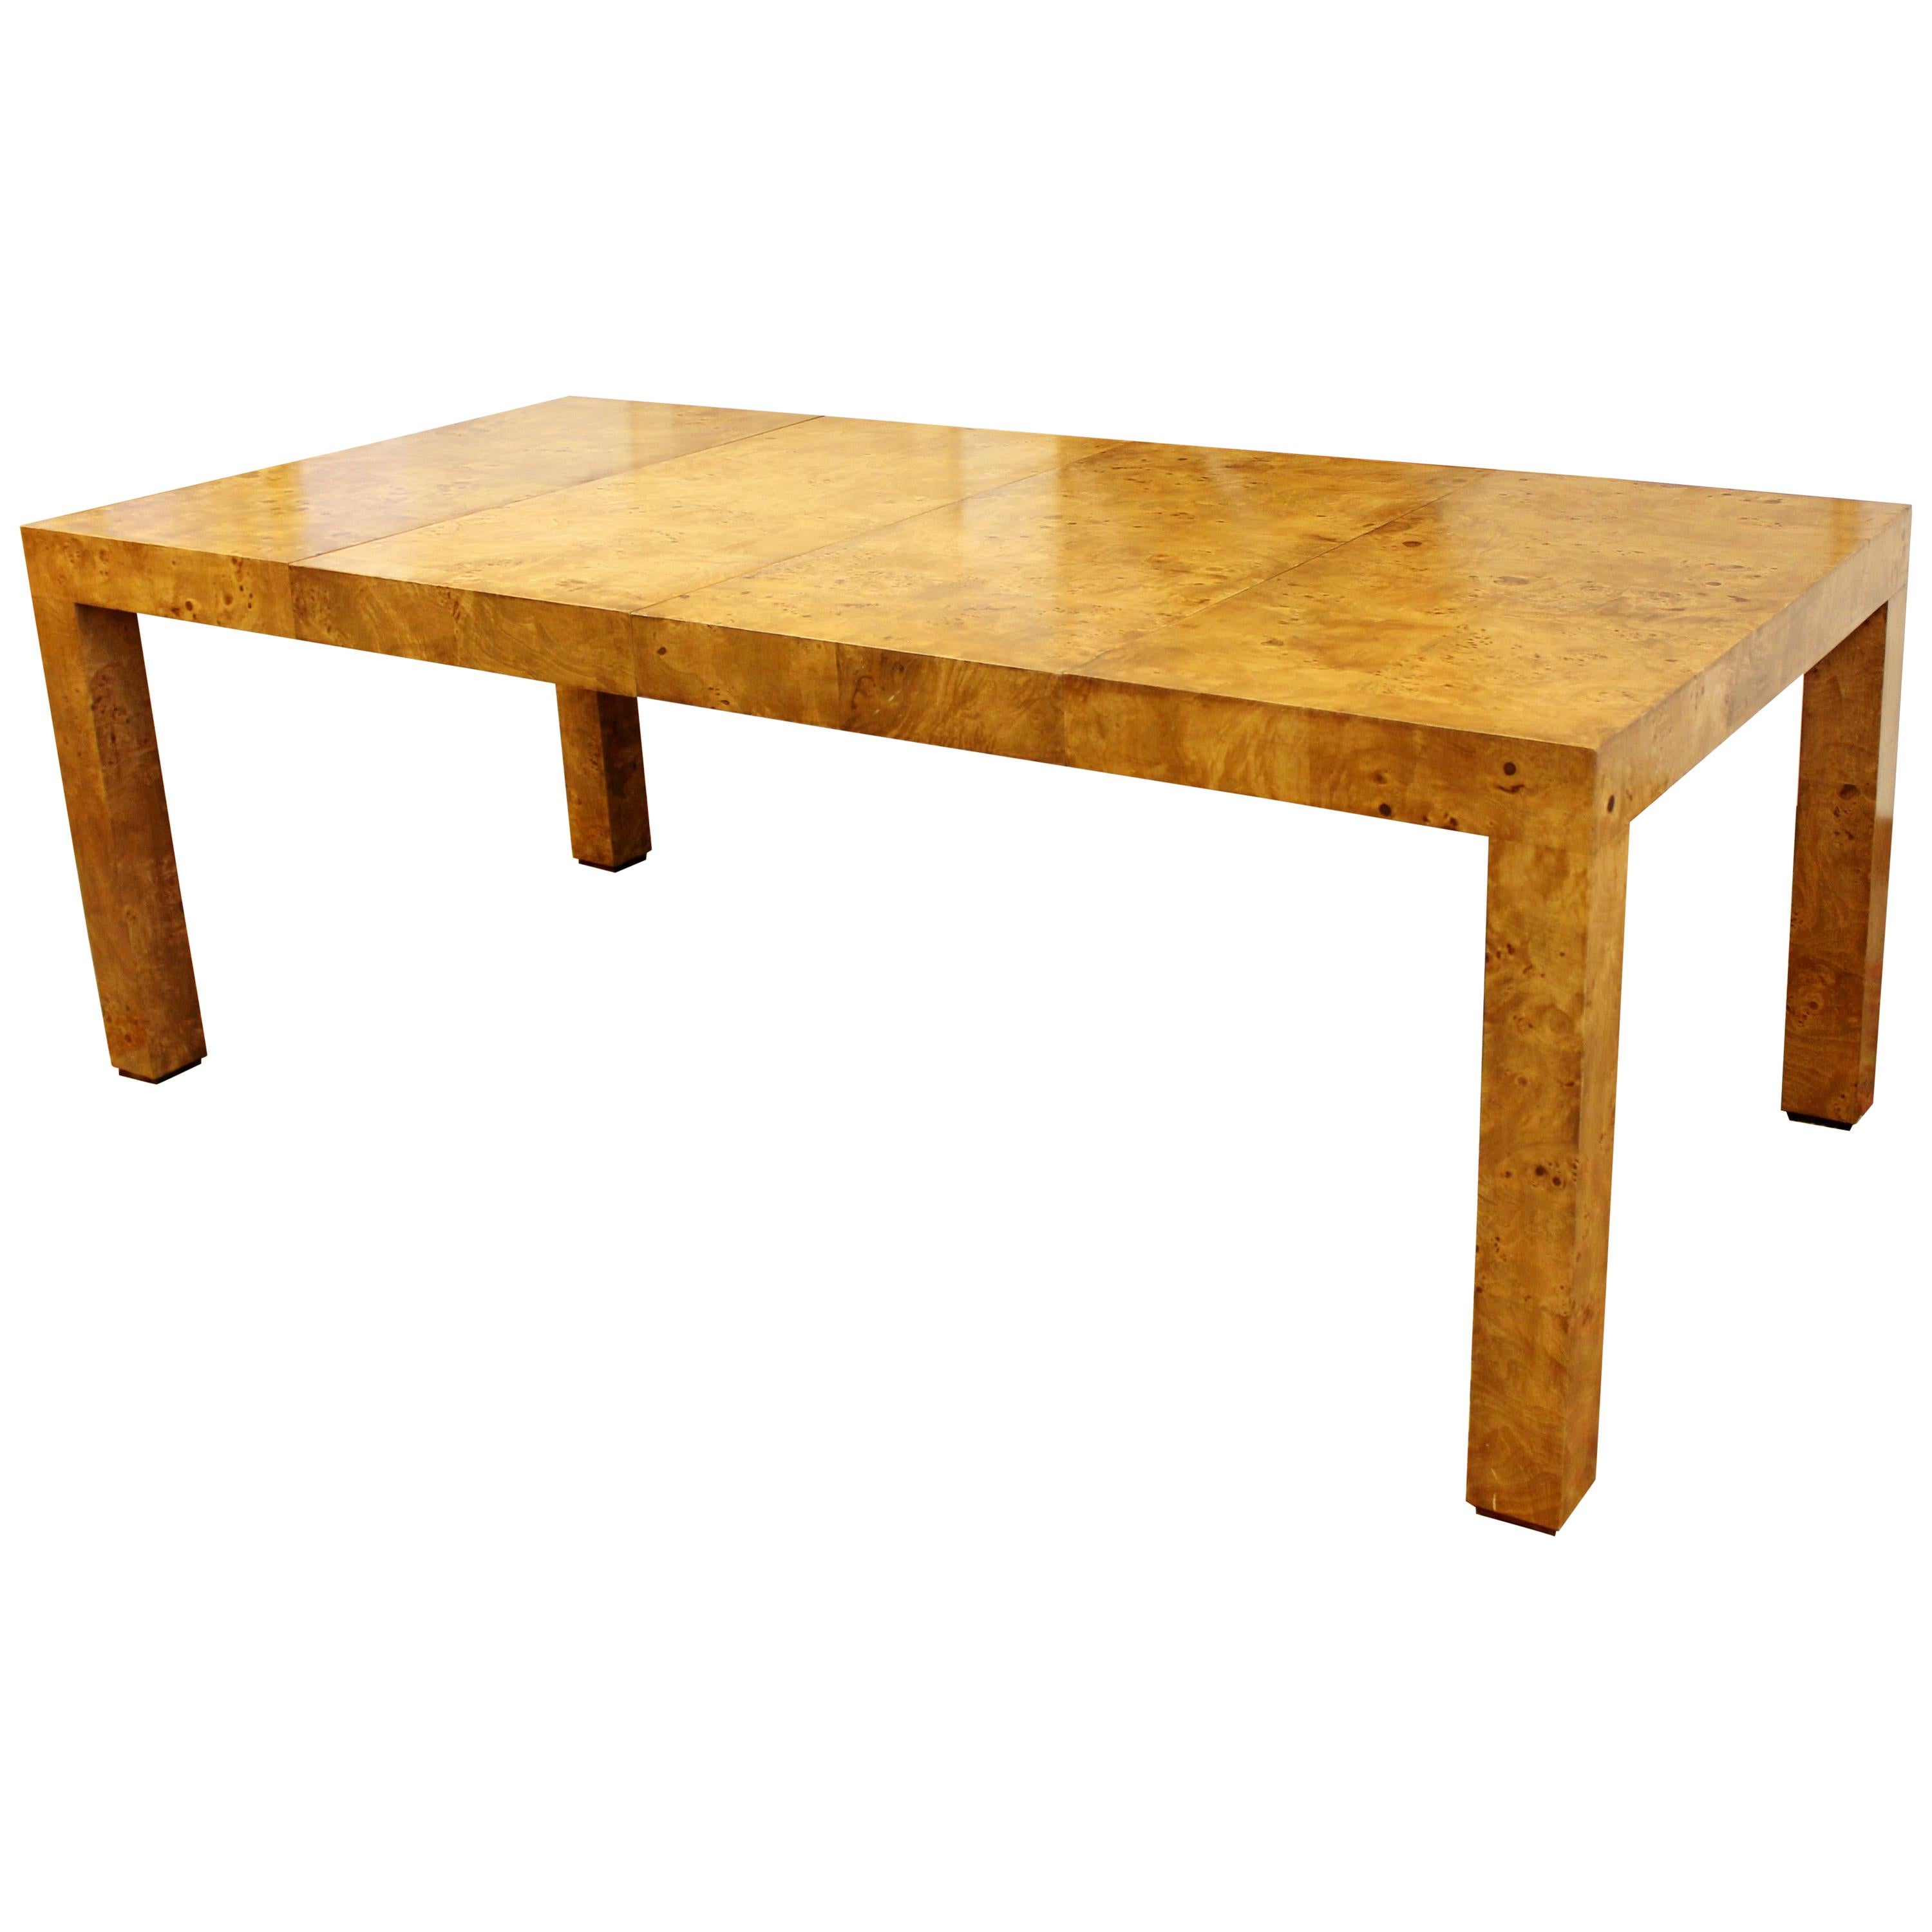 Mid-Century Modern Burl Wood Dining Table with 2 Leaves by Milo Baughman, 1970s